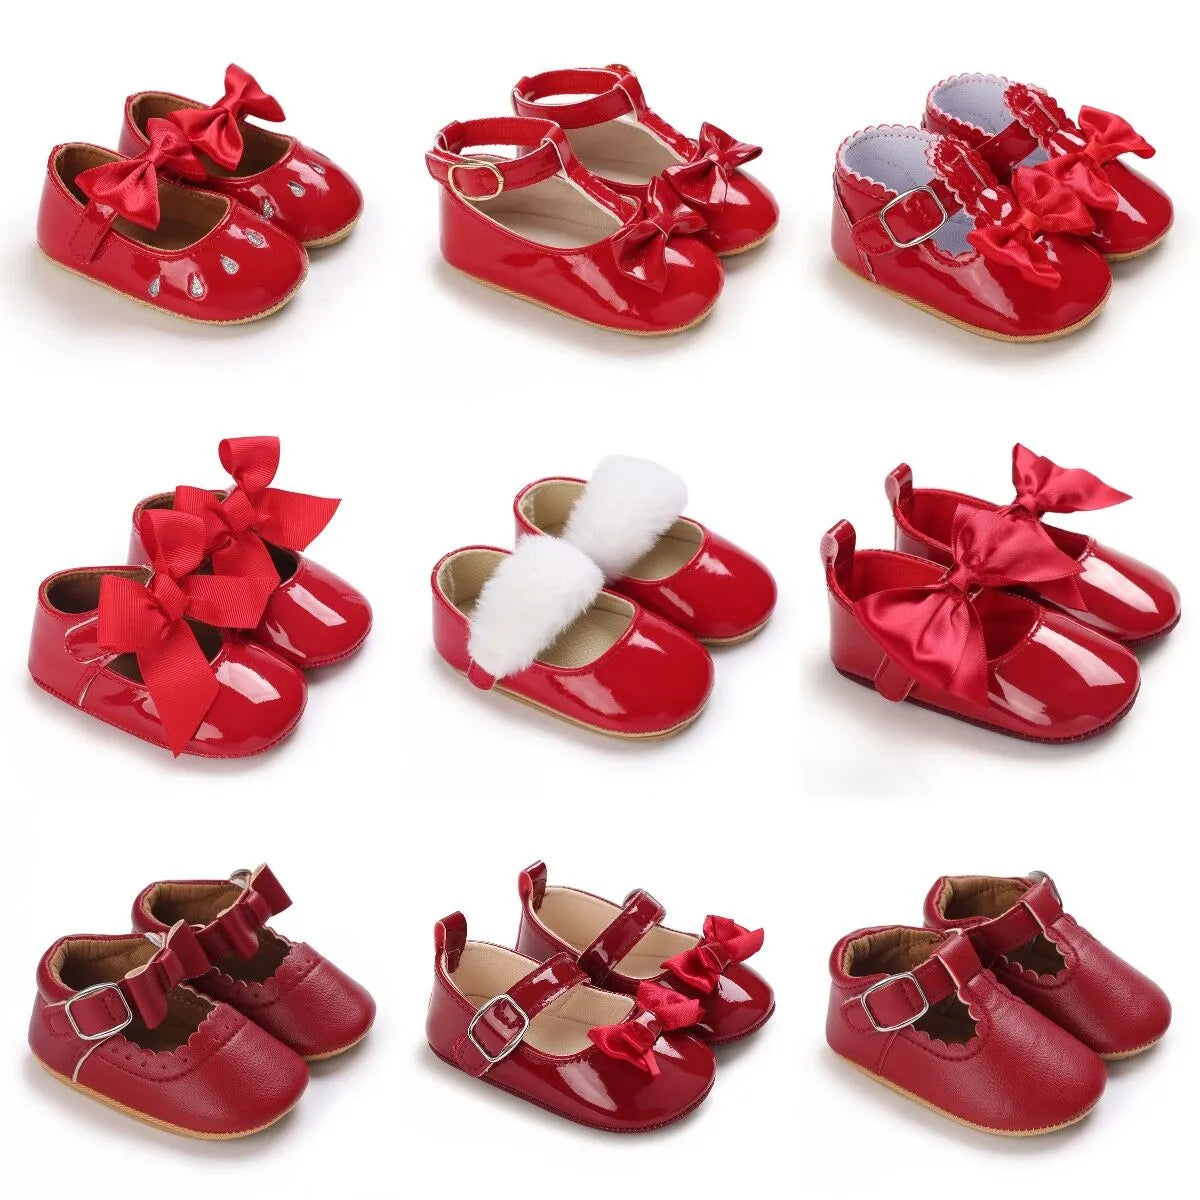 New Fashion Newborn Red Baby Shoes Non-slip Cloth Bottom Shoes For Girls Elegant And Noble Leisure Baby First Walking Shoes